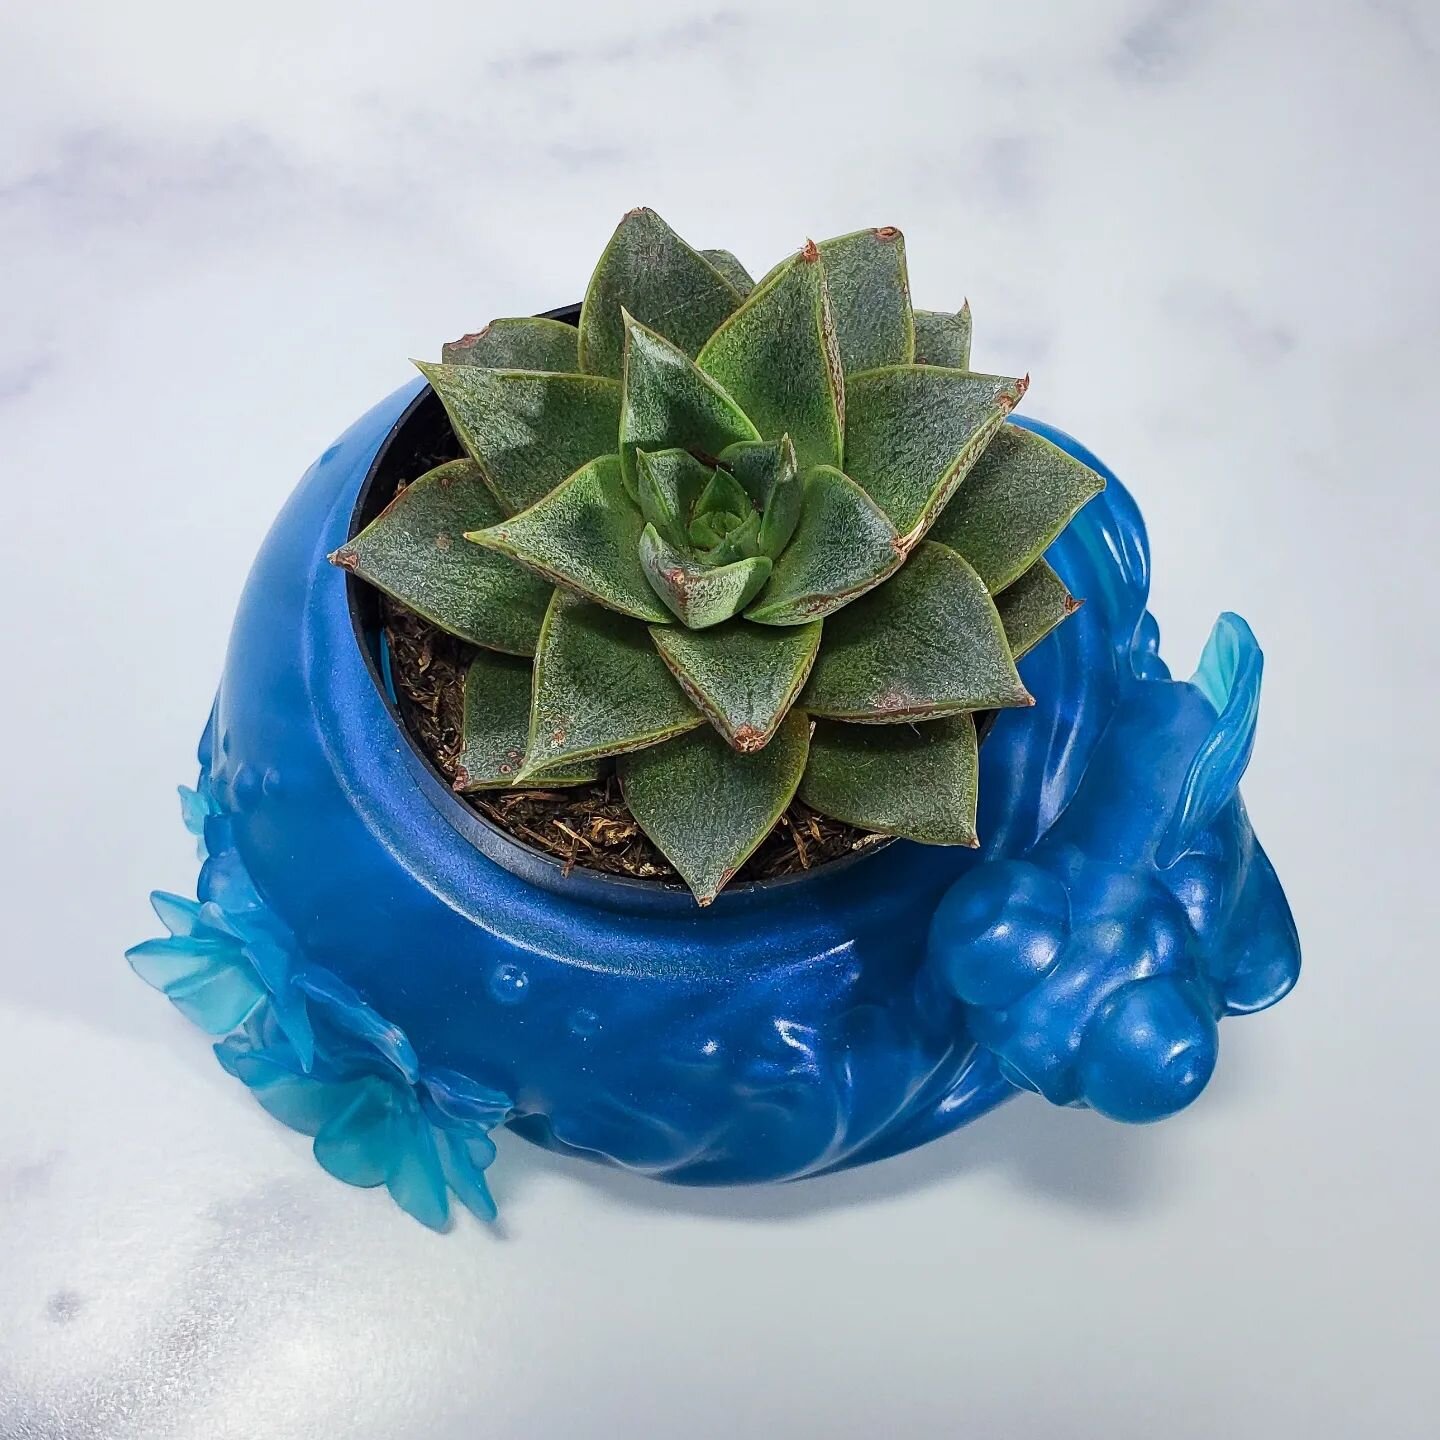 Editing lots of photos and doing some website updates this weekend~ 

This blue clear cast 'Go With The Flow' resin planter is already sold to Aaron @martian_toys 👋 BUT I may cast a few more up! 
Liking this color a lot 🌊🐟🌵

#resin #smoothon #cas